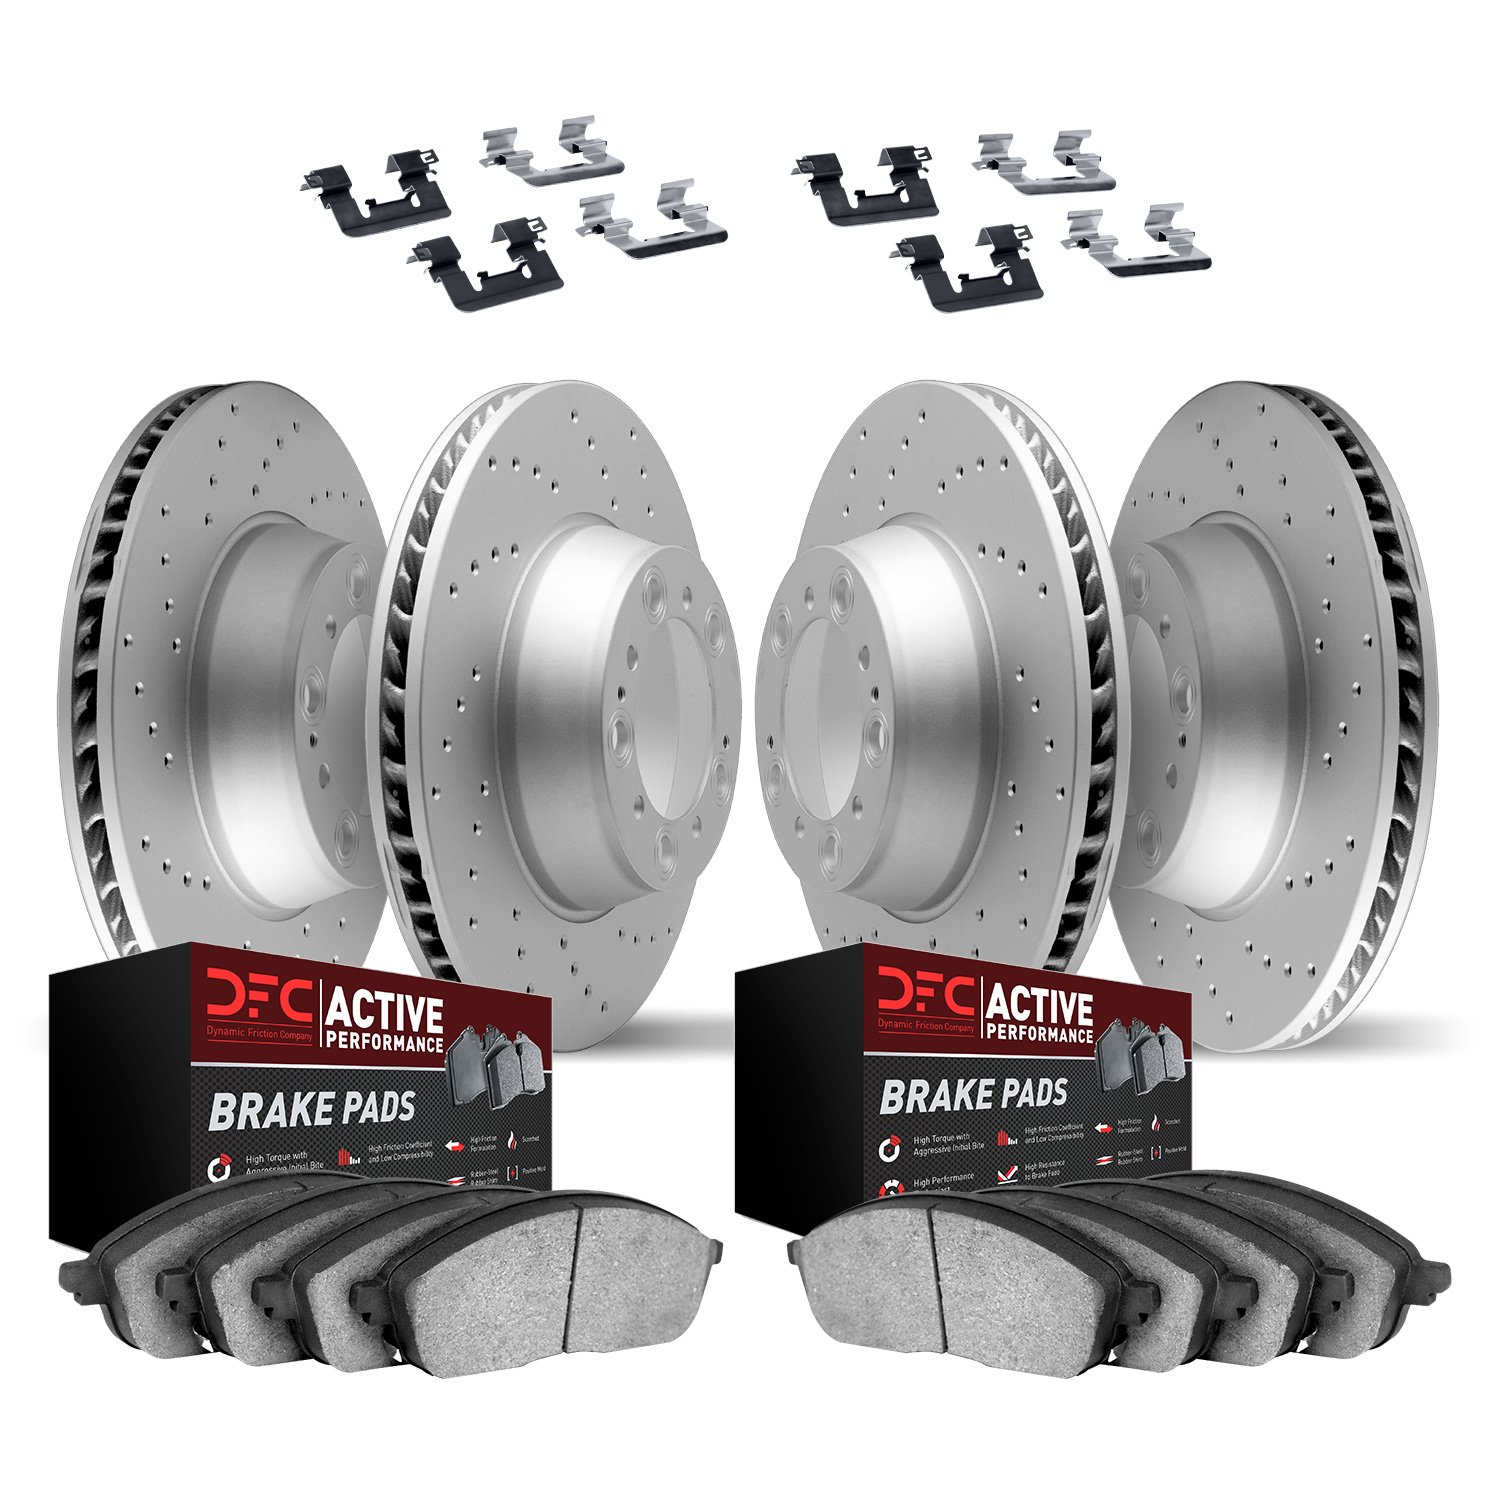 2714-31044 Geoperformance Drilled Brake Rotors with Active Performance Pads Kit & Hardware, 2001-2005 BMW, Position: Front and R